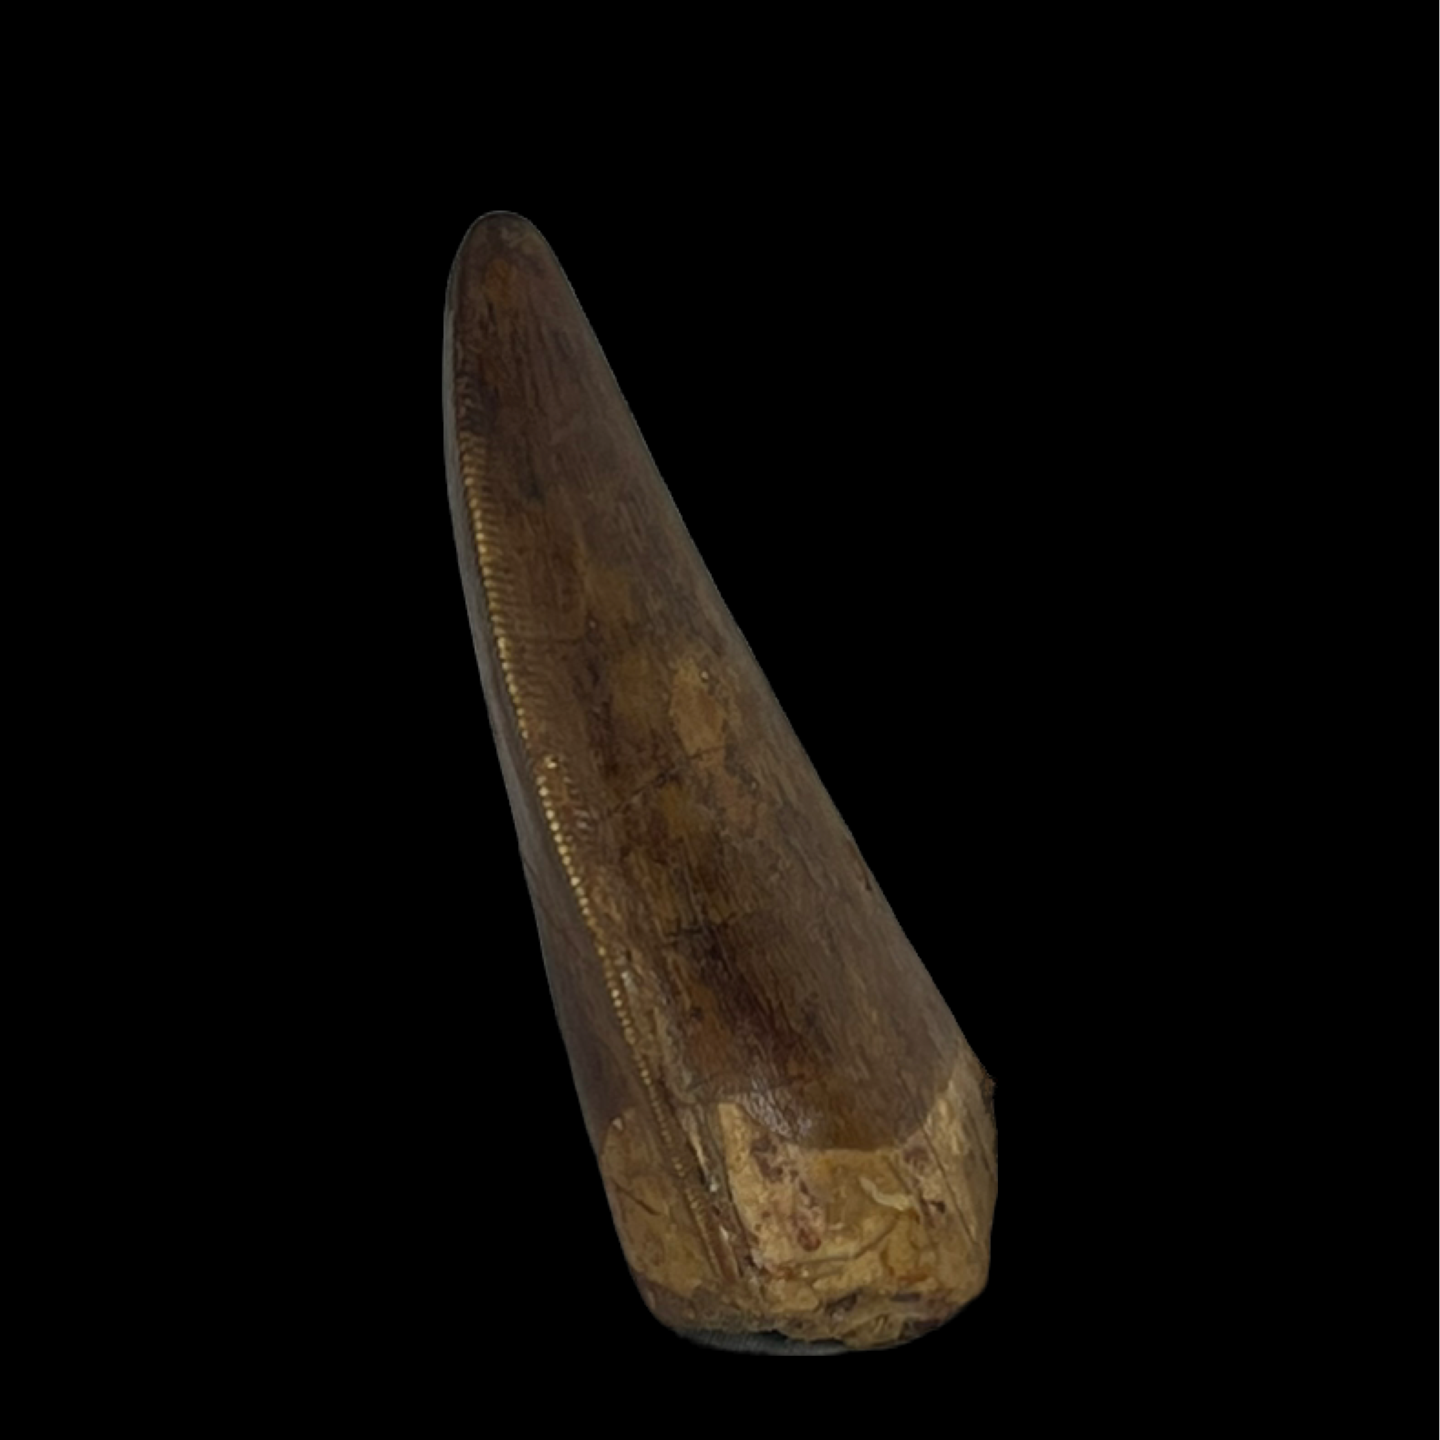 Carcharodontosaurus Tooth 01 (2 in)